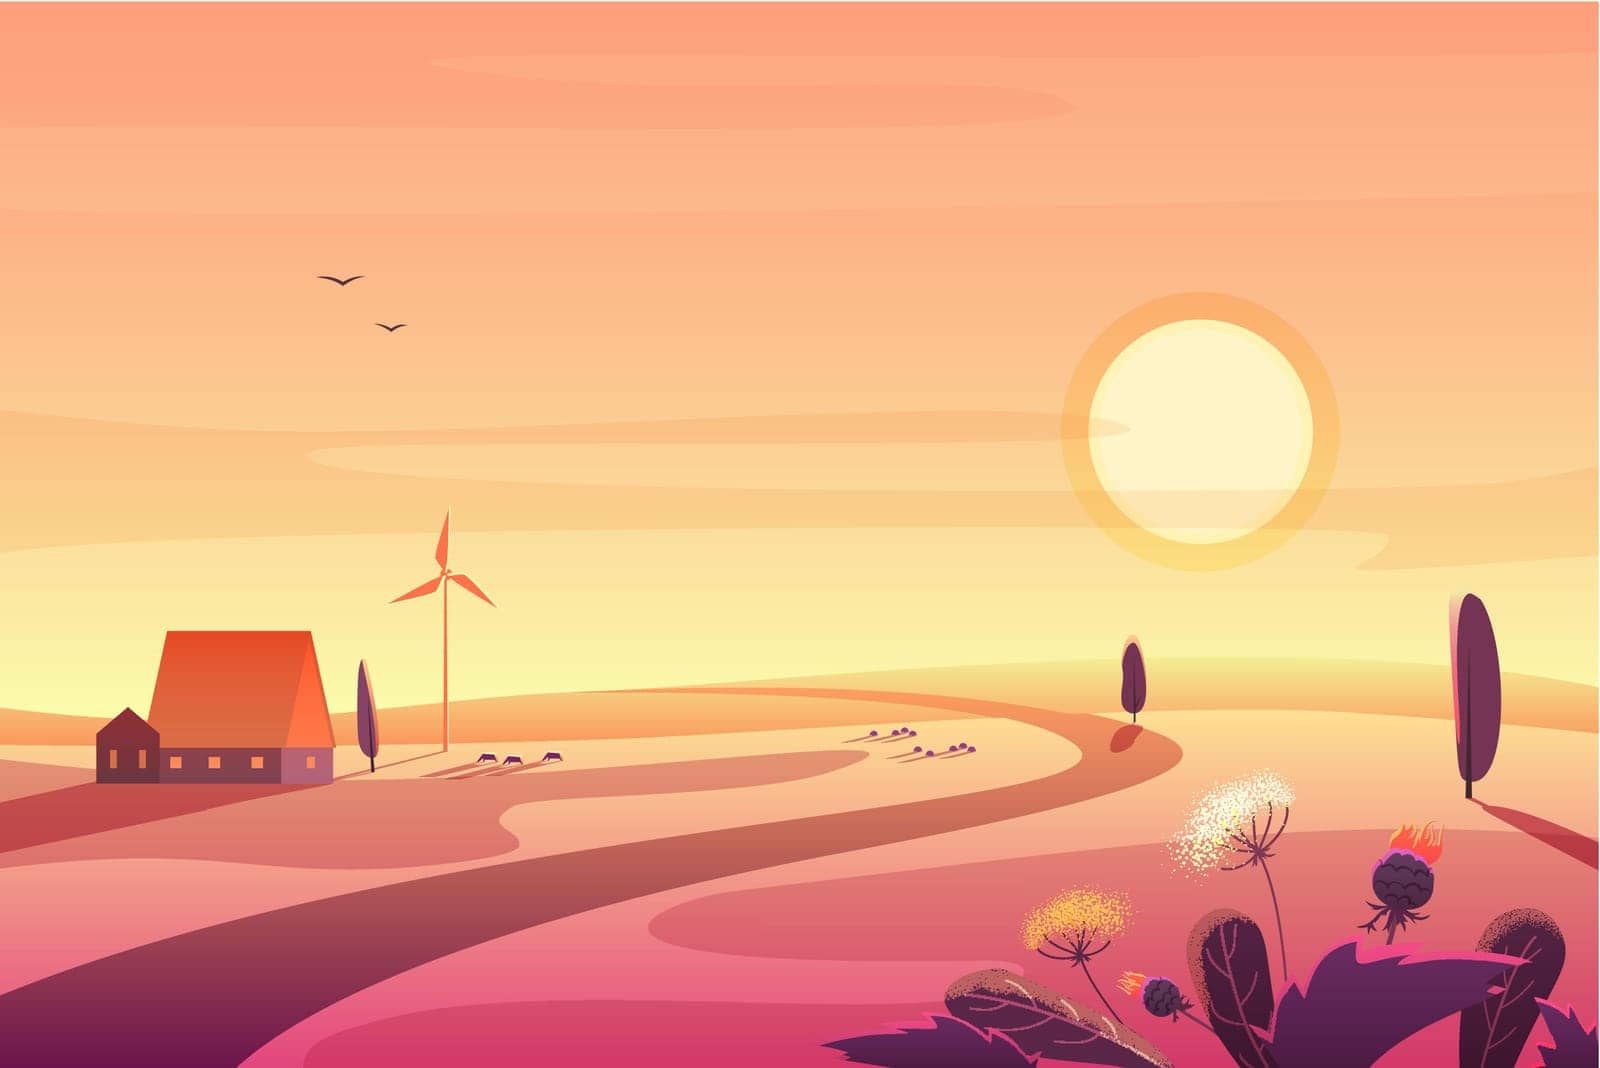 Solar rural landscape in sunset with hills, small house, wind turbine vector illustration. by Lembergvector